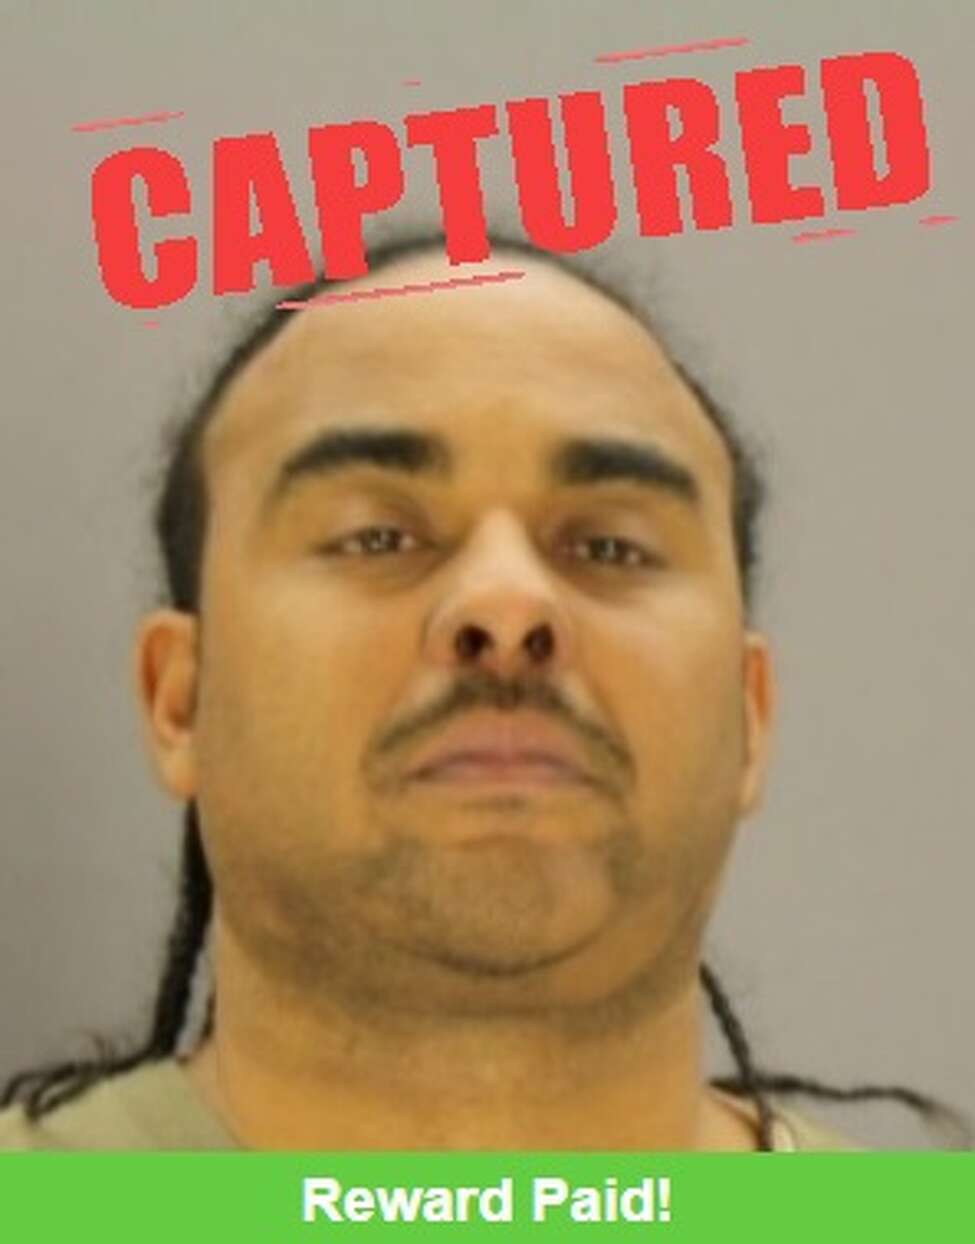 Latin Kings Gang Member Lands On The Texas 10 Most Wanted Fugitives List For Parole Violation